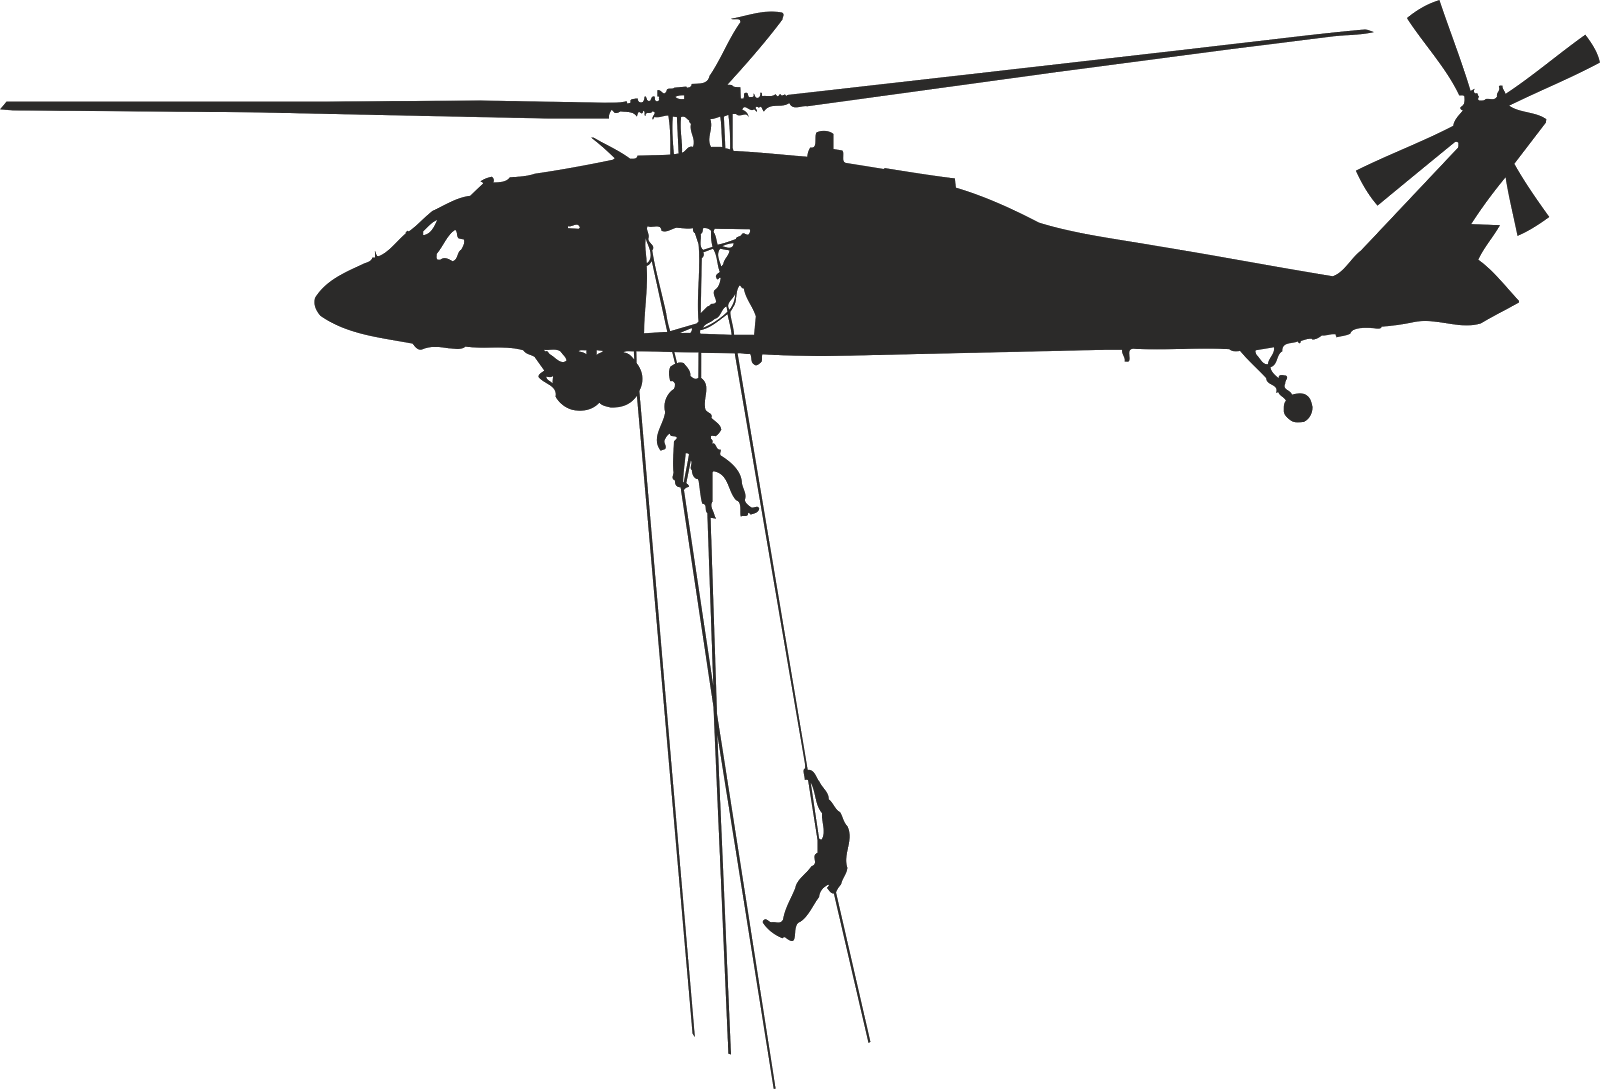 Army Helicopter Silhouette #1414518 (License: Personal Use) .